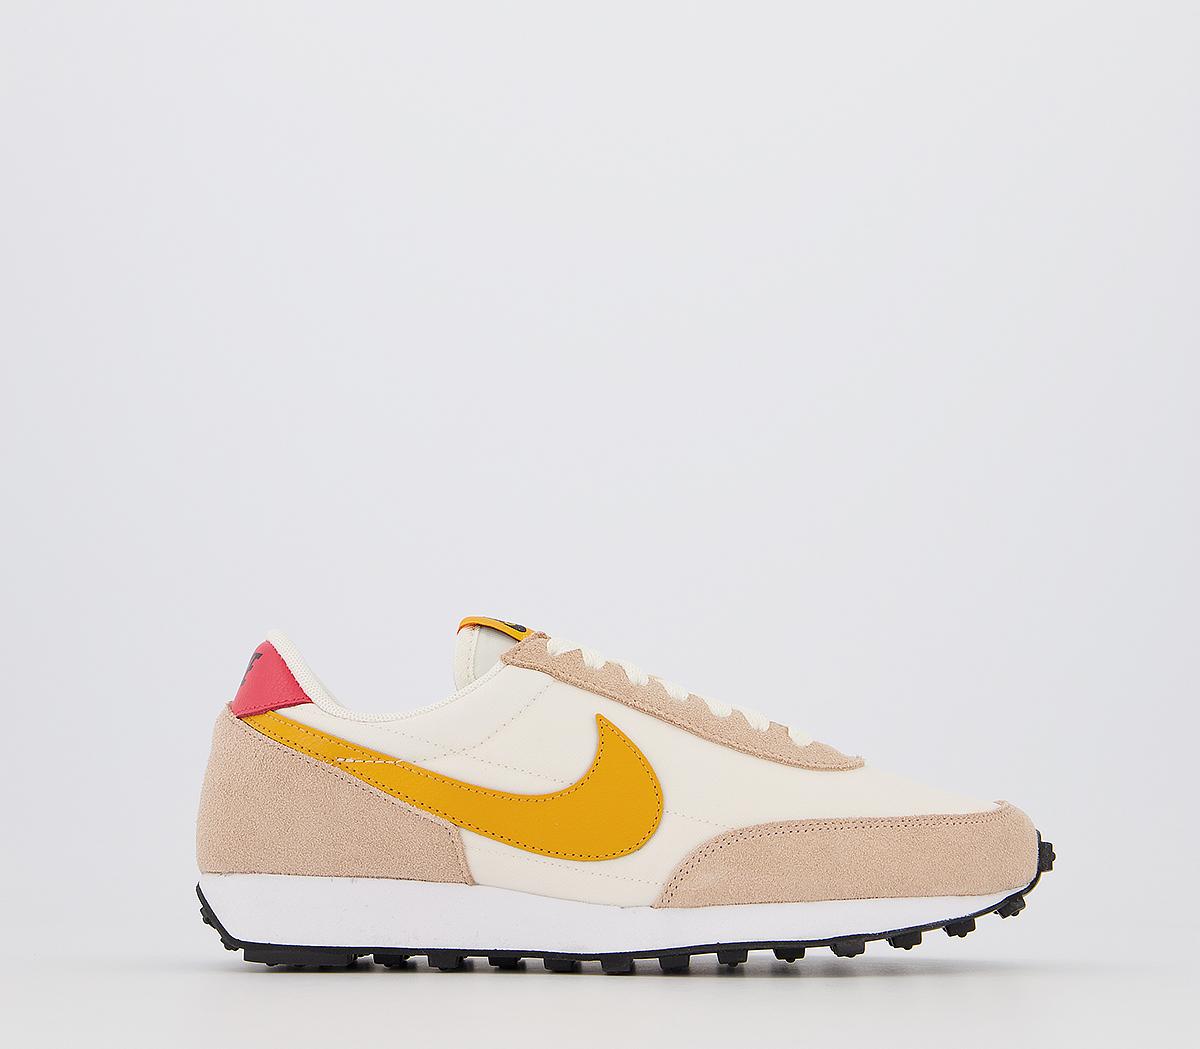 dam Bang om te sterven voorzichtig Nike Daybreak Trainers Ivory Pollen Rise Shimmer Red Black White - Women's  Trainers